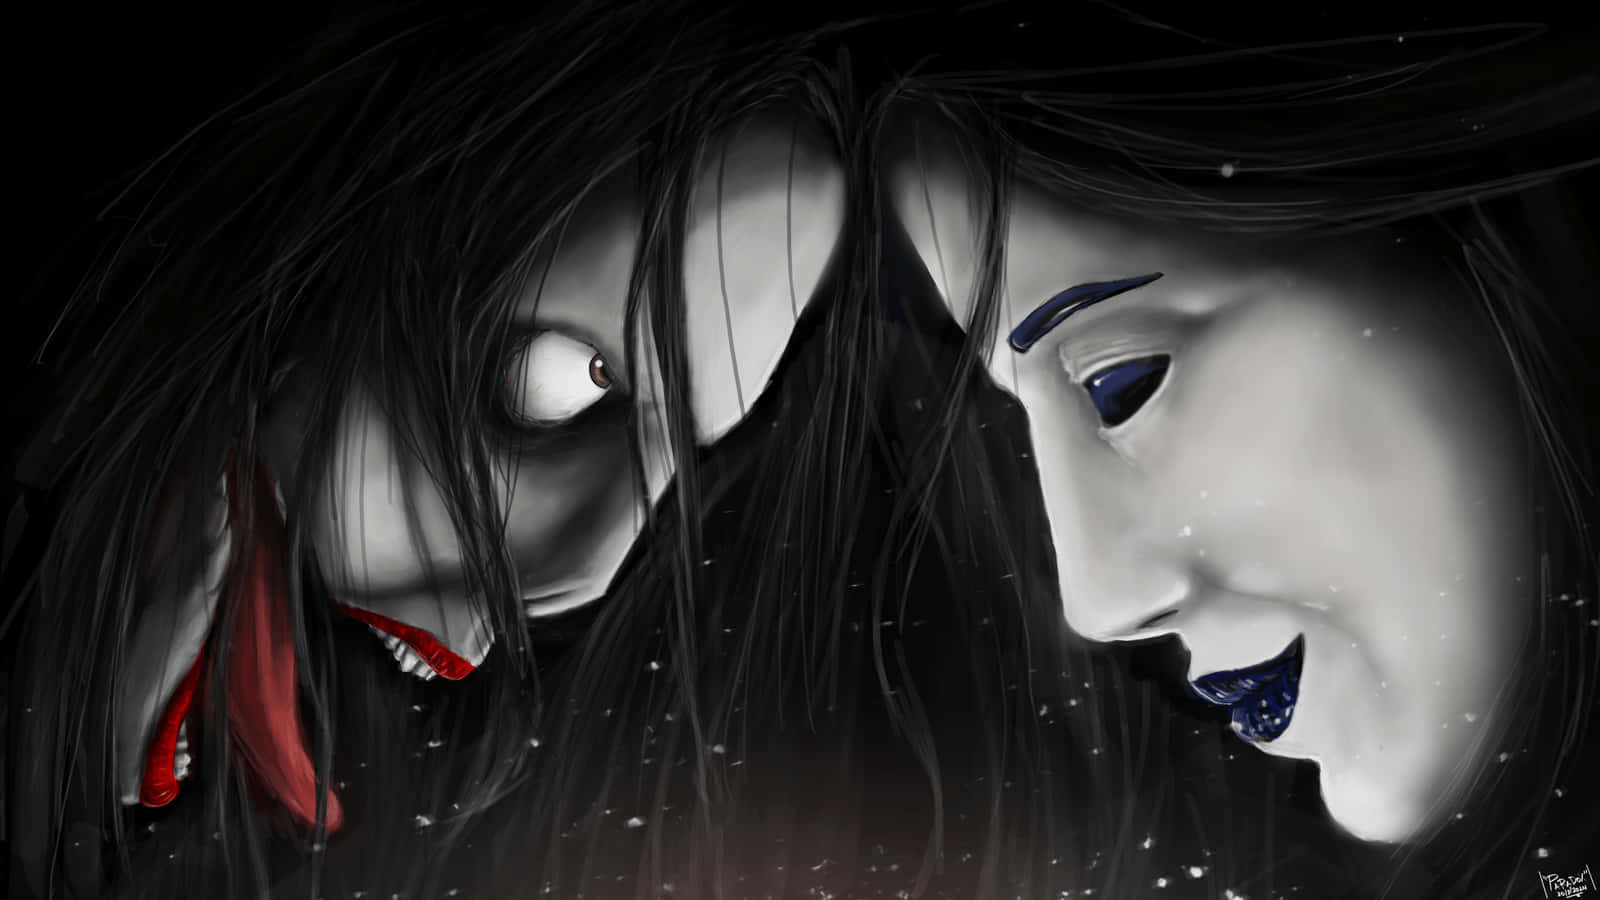 "Jeff The Killer - Don't Close Your Eyes"